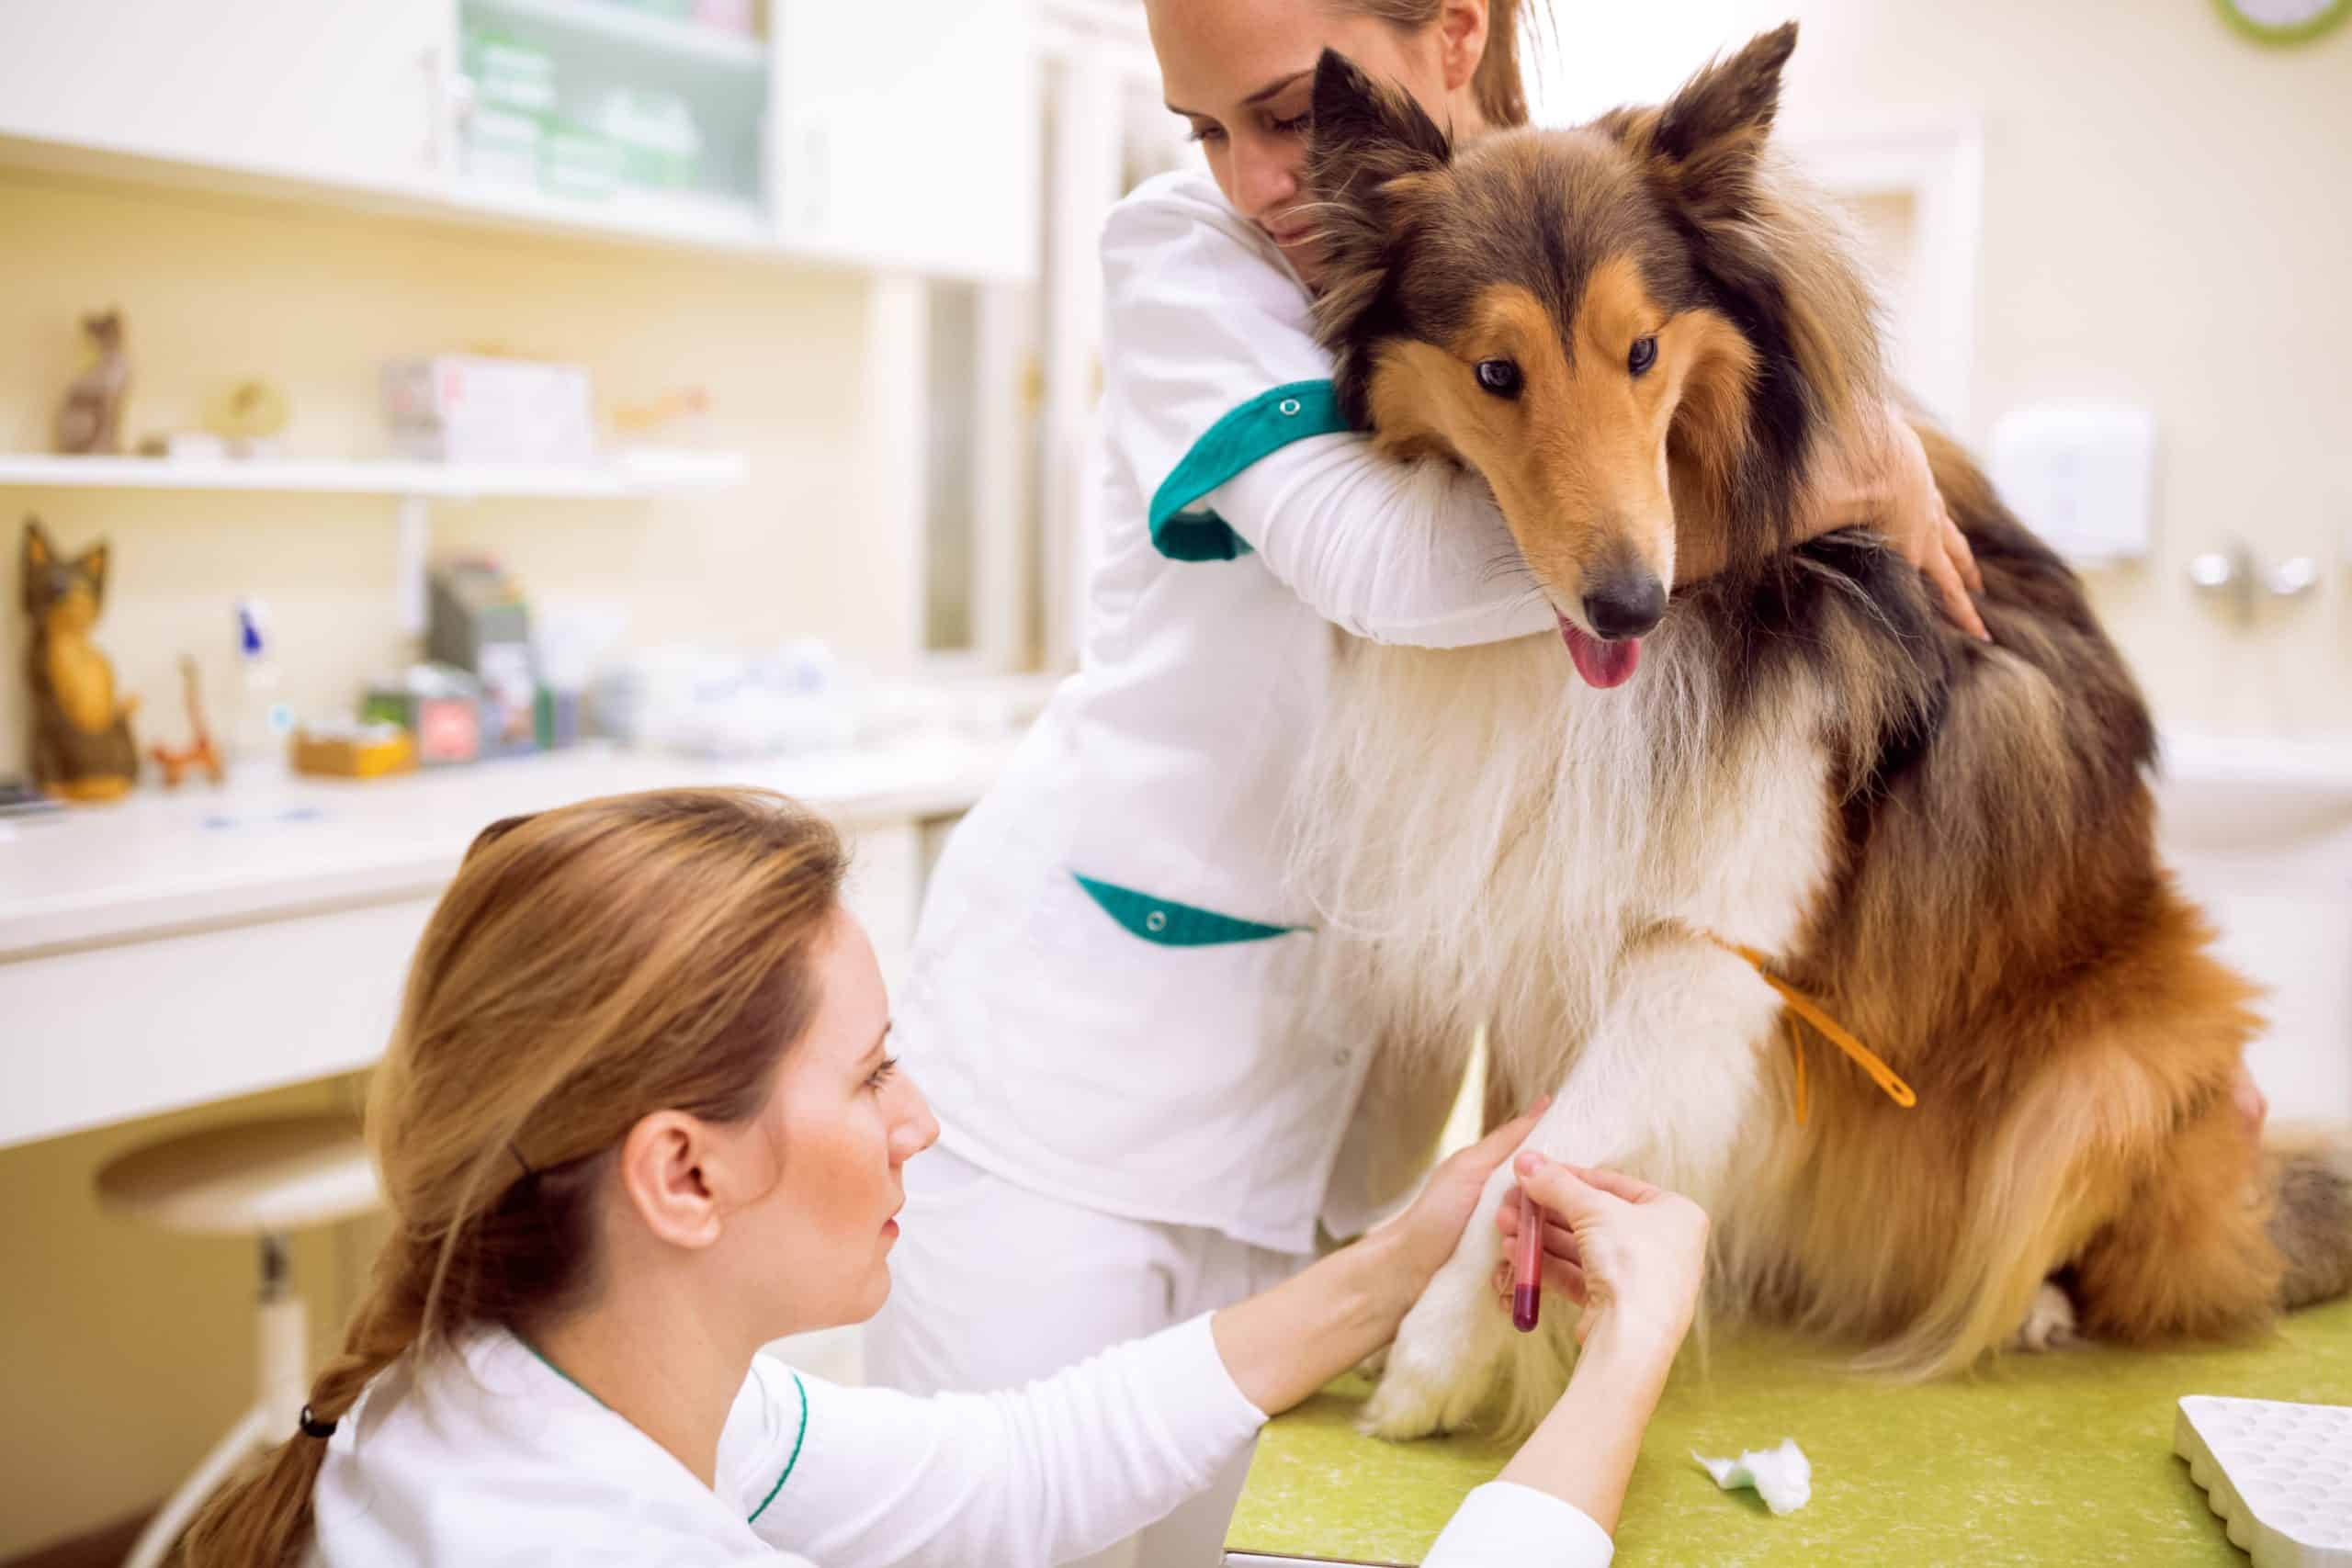 Vet techs draw a blood sample from collie. Liver toxicity can happen in dogs of all ages, and especially in pups. Dogs are more susceptible to liver disease due to immature liver metabolism.